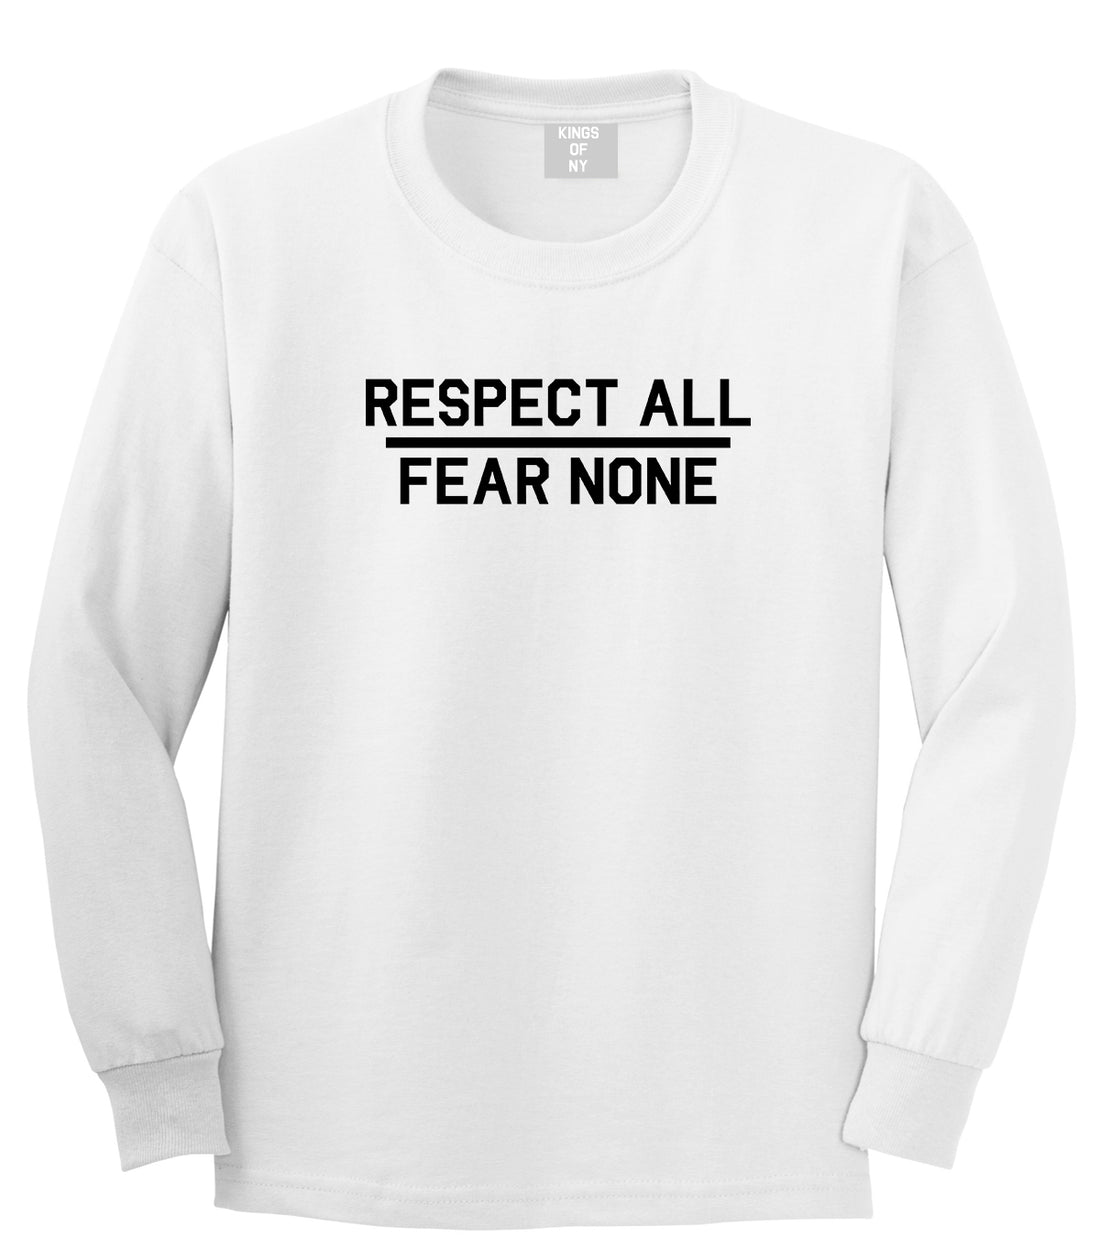 Respect All Fear None Mens Long Sleeve T-Shirt White by Kings Of NY